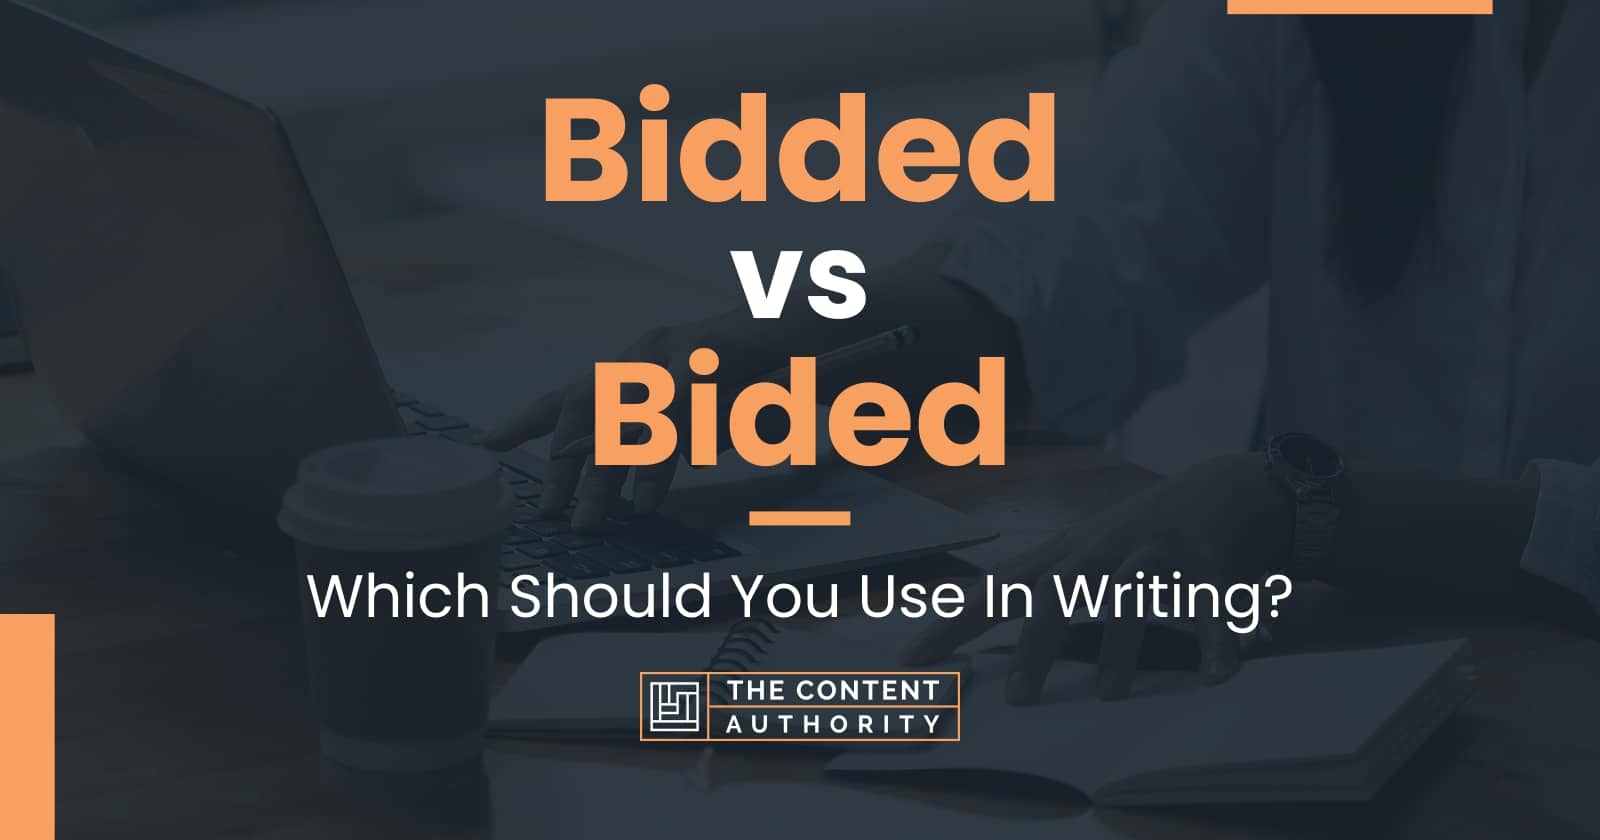 Bidded vs Bided: Which Should You Use In Writing?